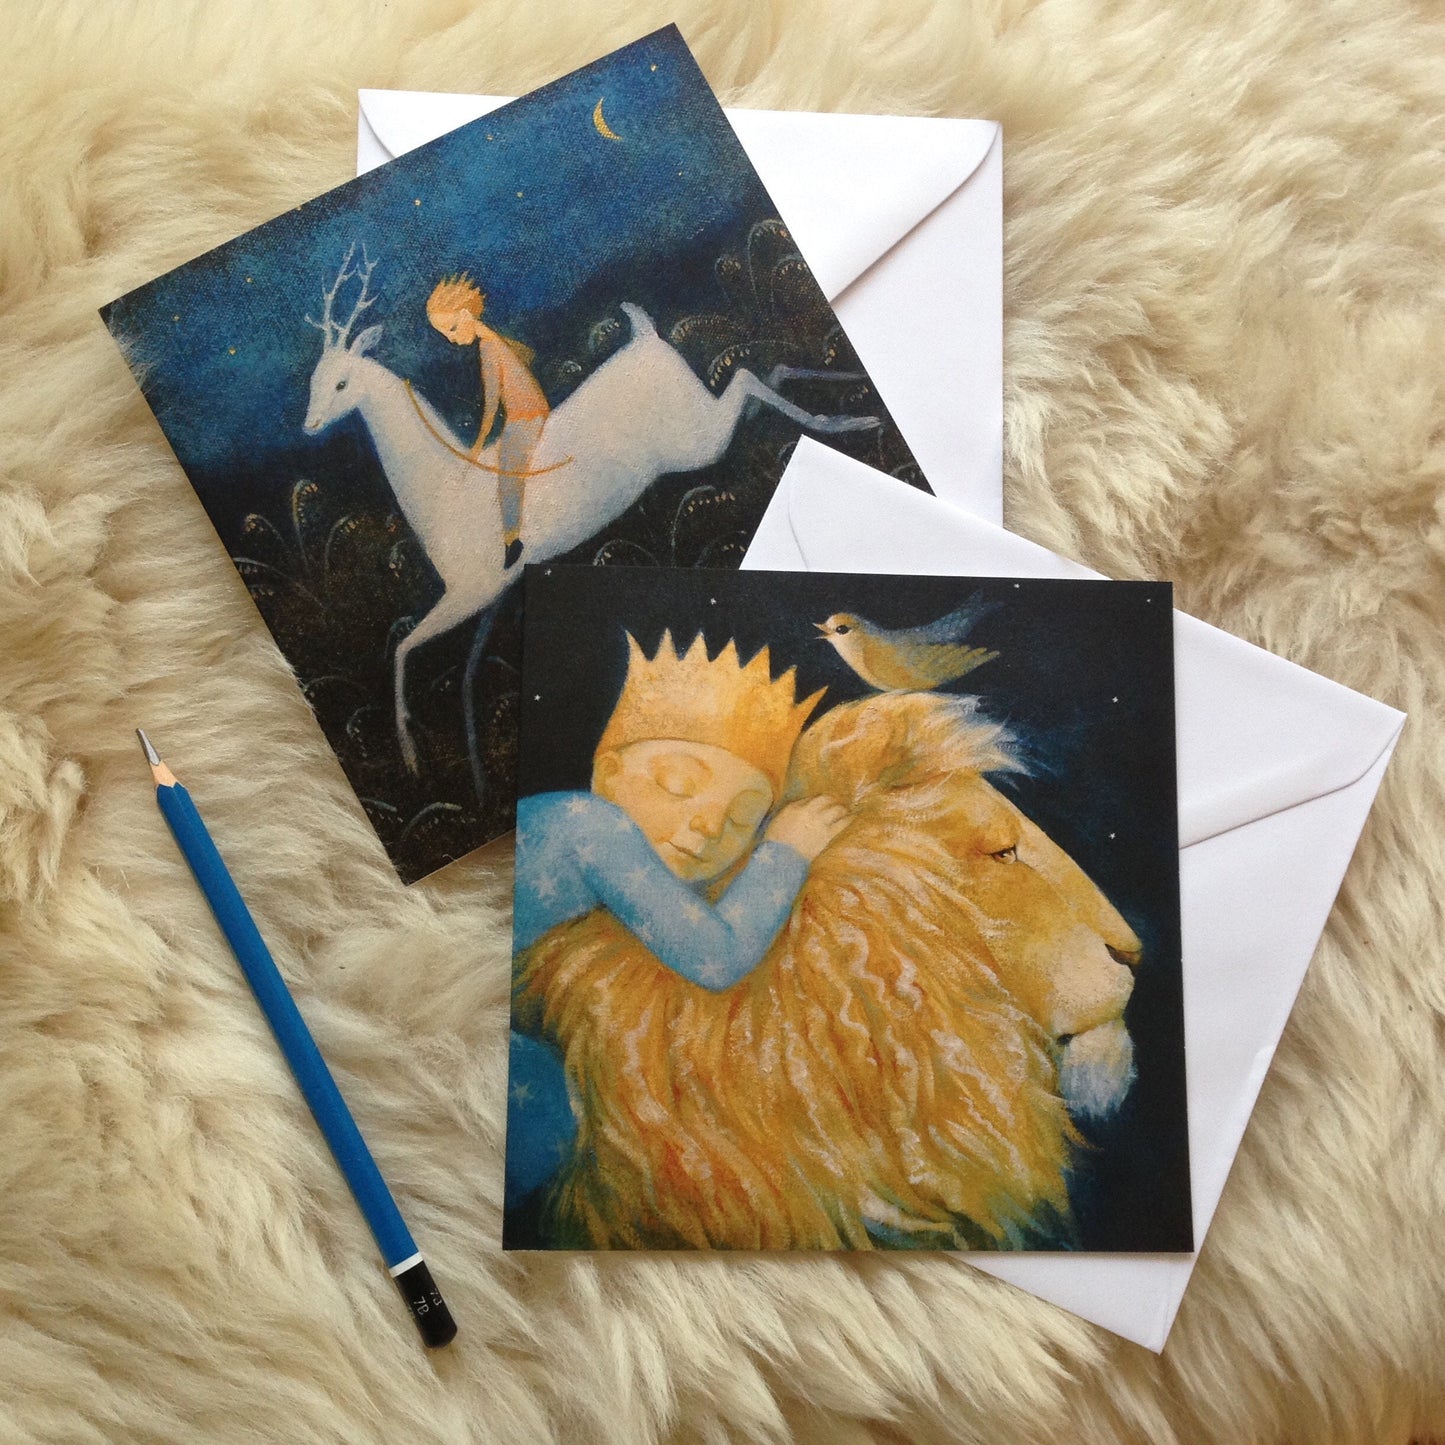 "Lion, bird" & "Hunter of Dreams" 6 greetings cards - 2 images